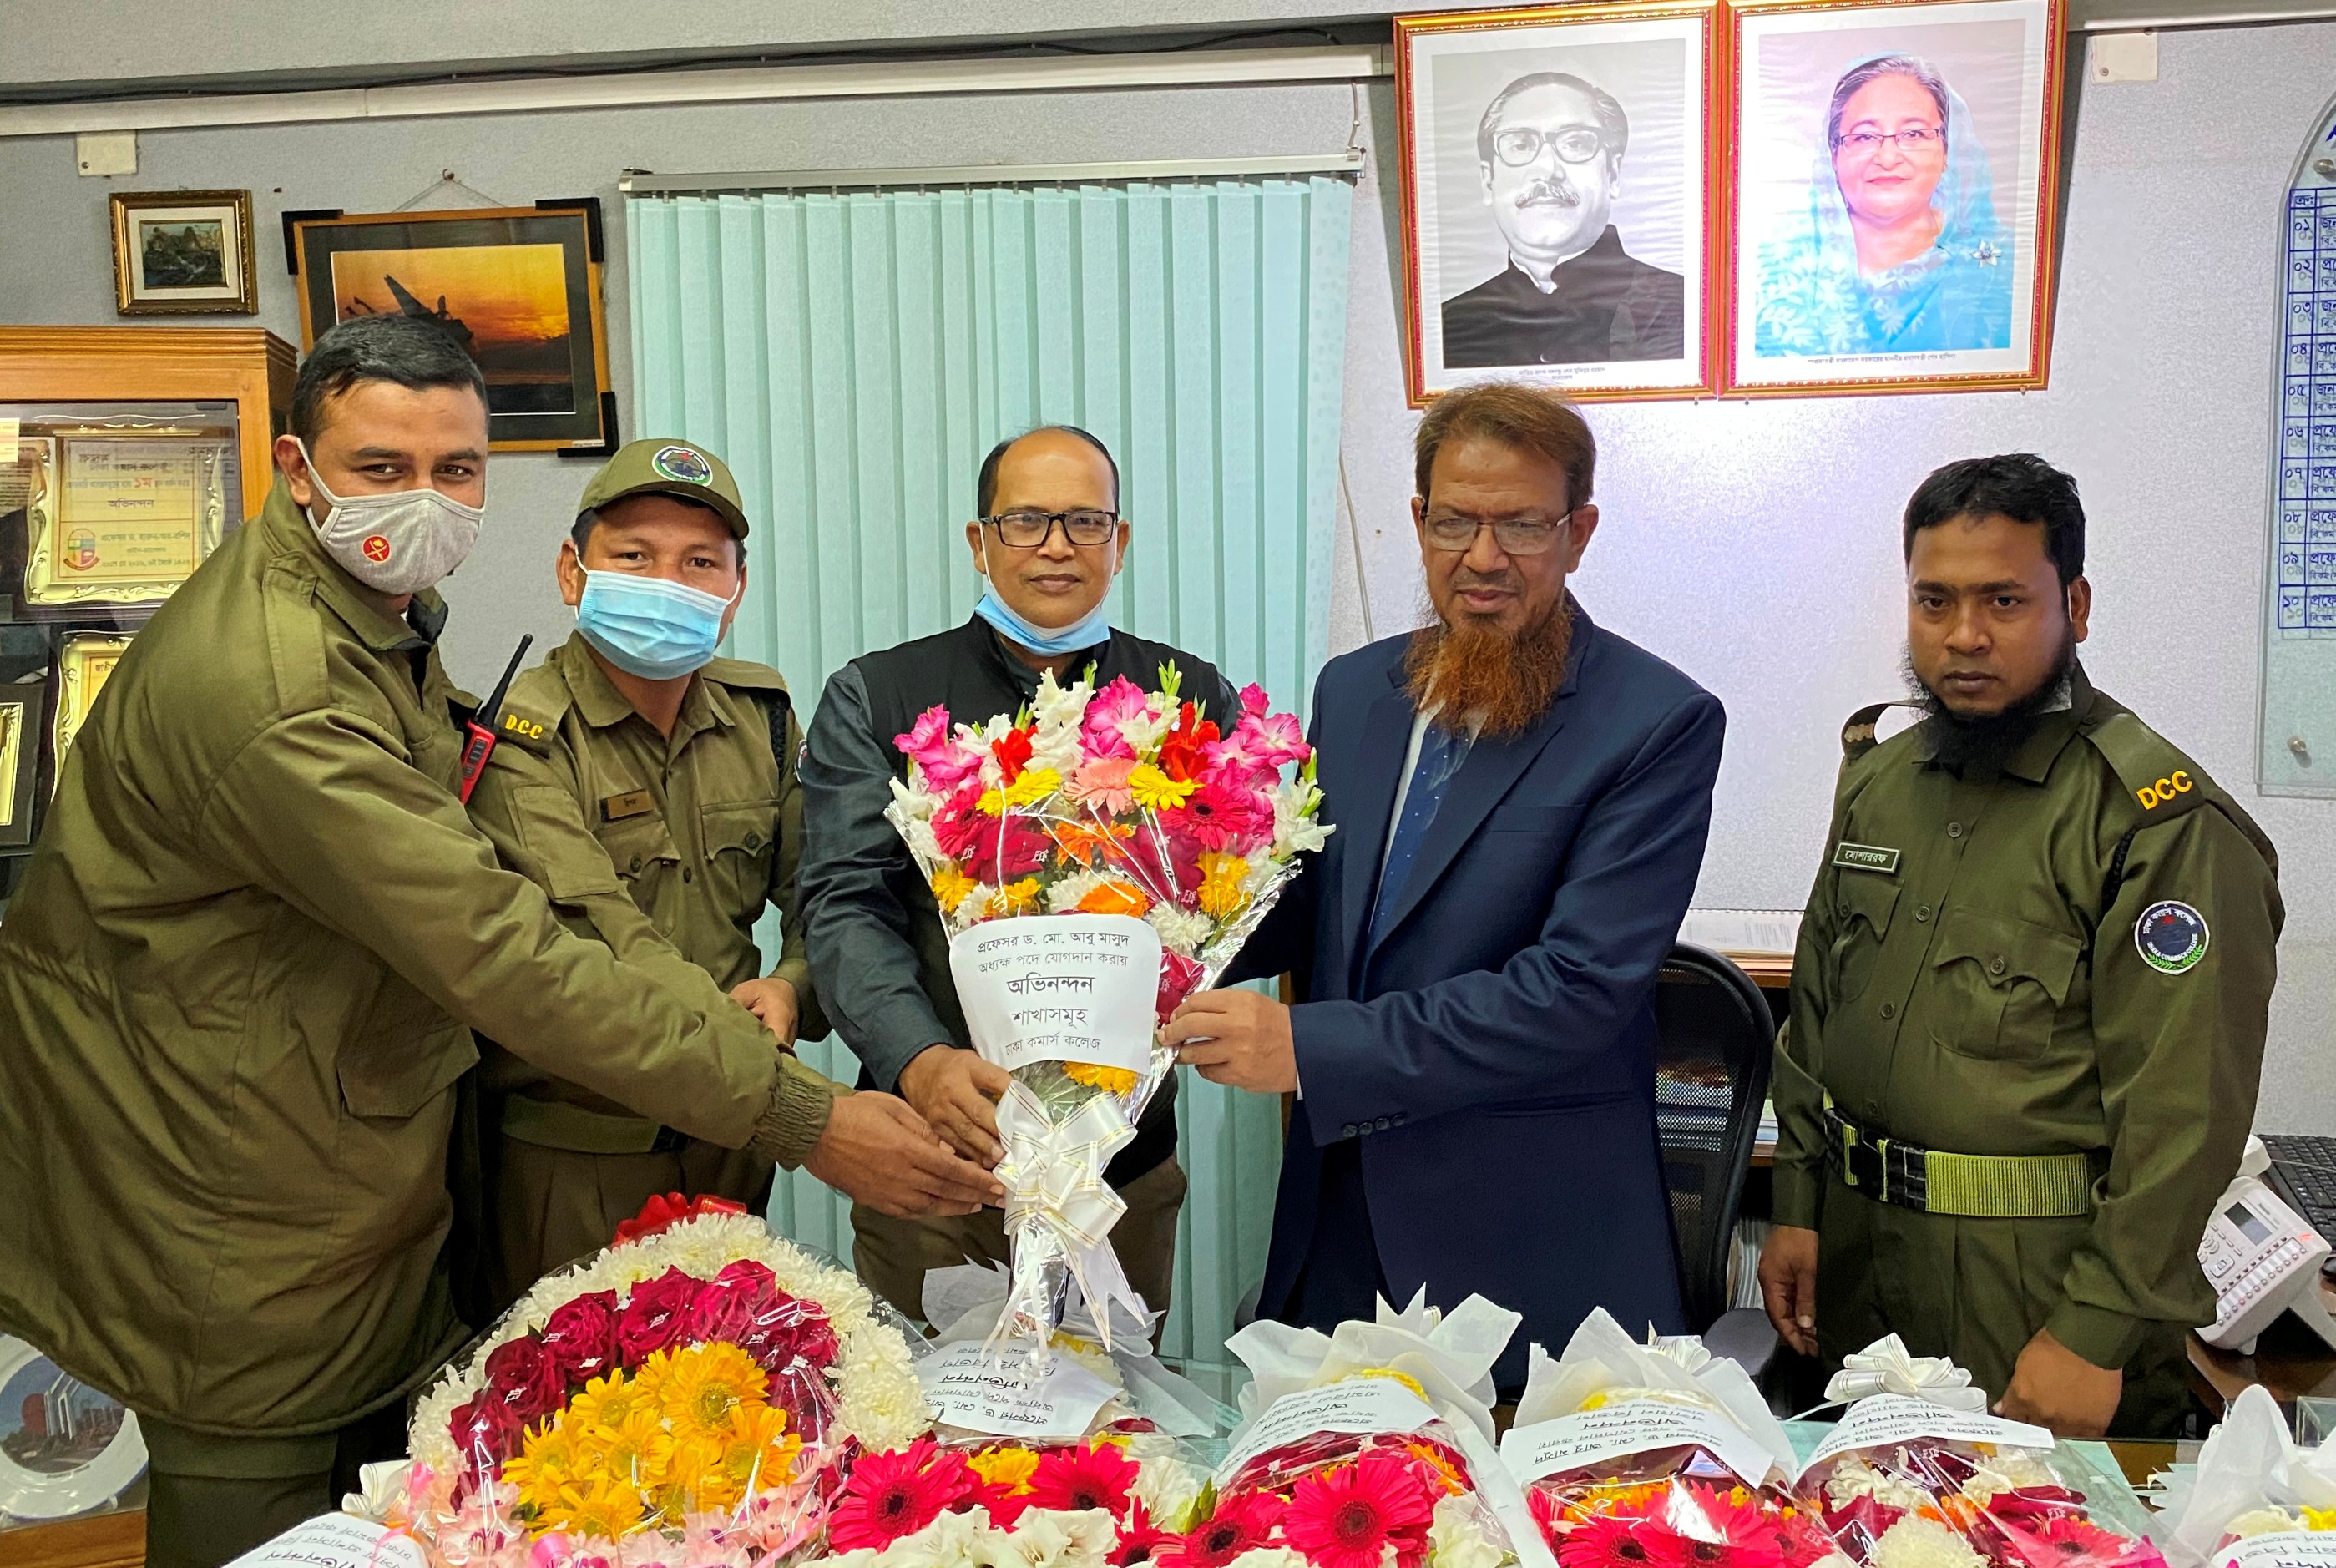 Reception to Principal Prof. Dr. Md. Abu Masud by Security Section